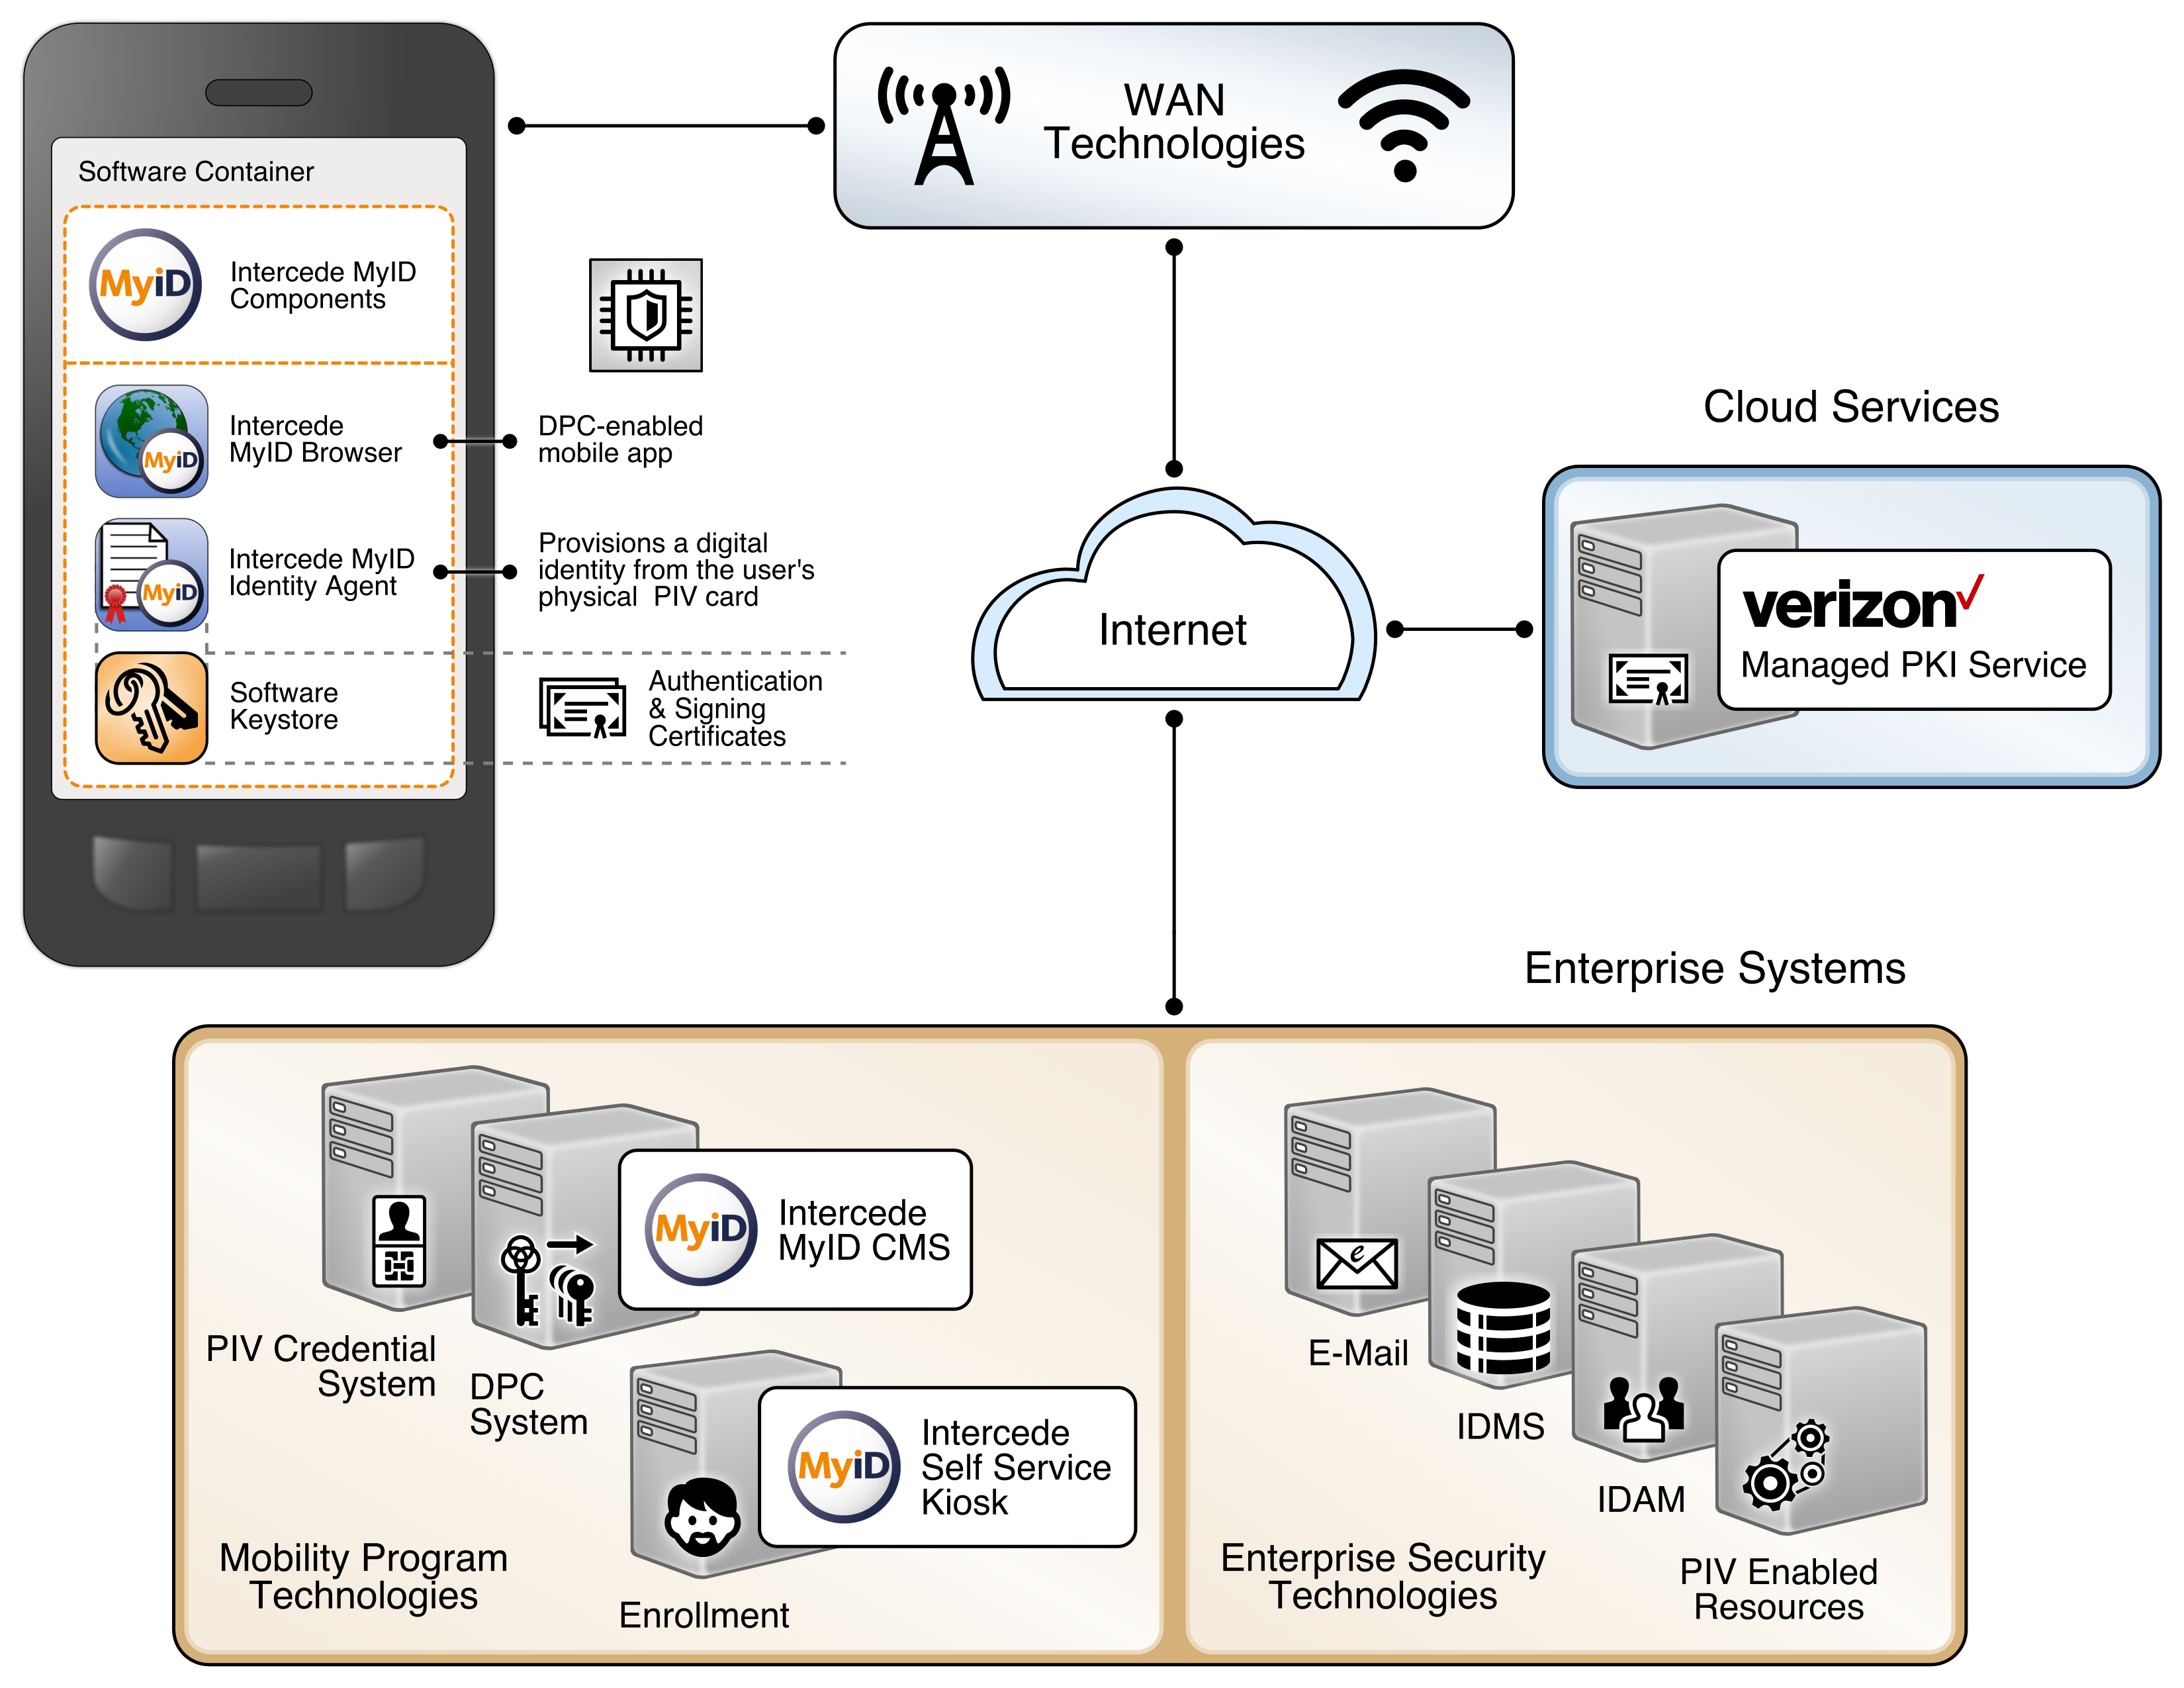 A visual representation of the mobile device hybrid architecture for PIV card and DPC lifecycle management using Software Keystore.